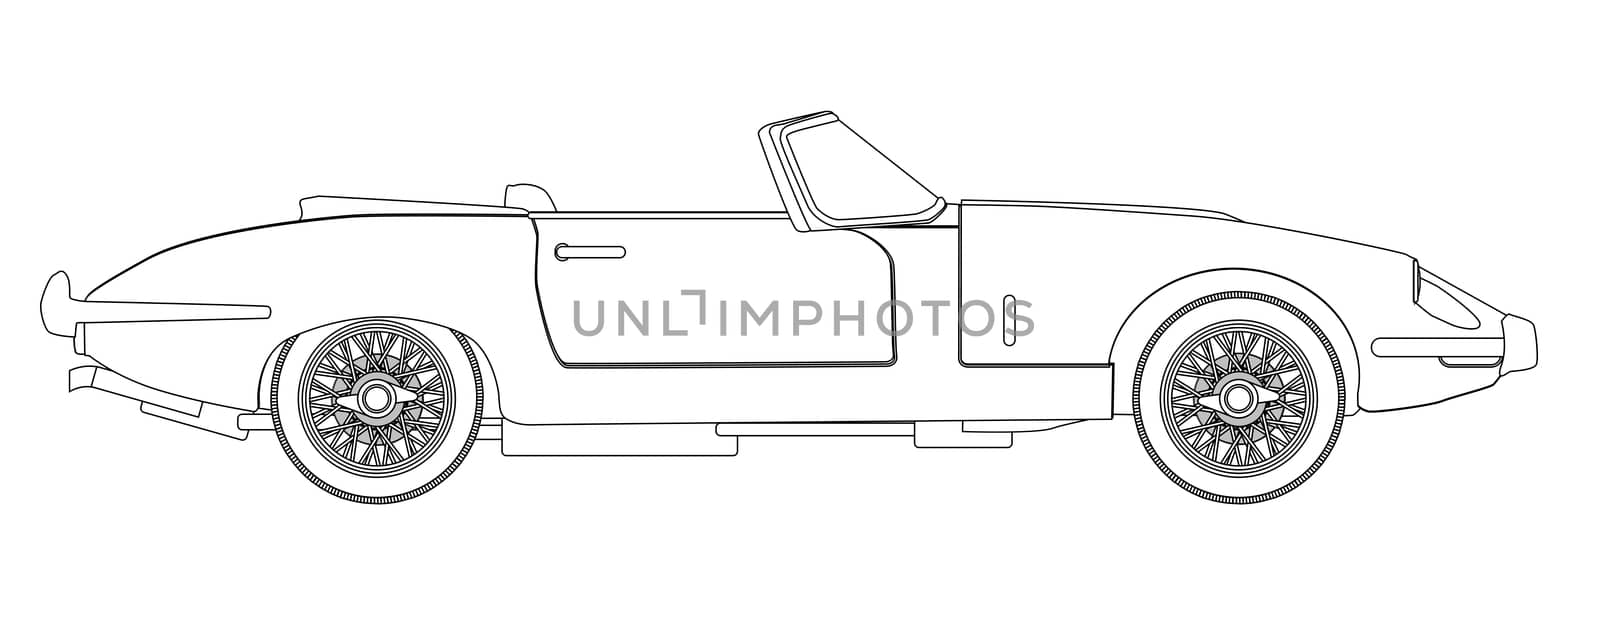 A typical sleak British style open top sports car in outline